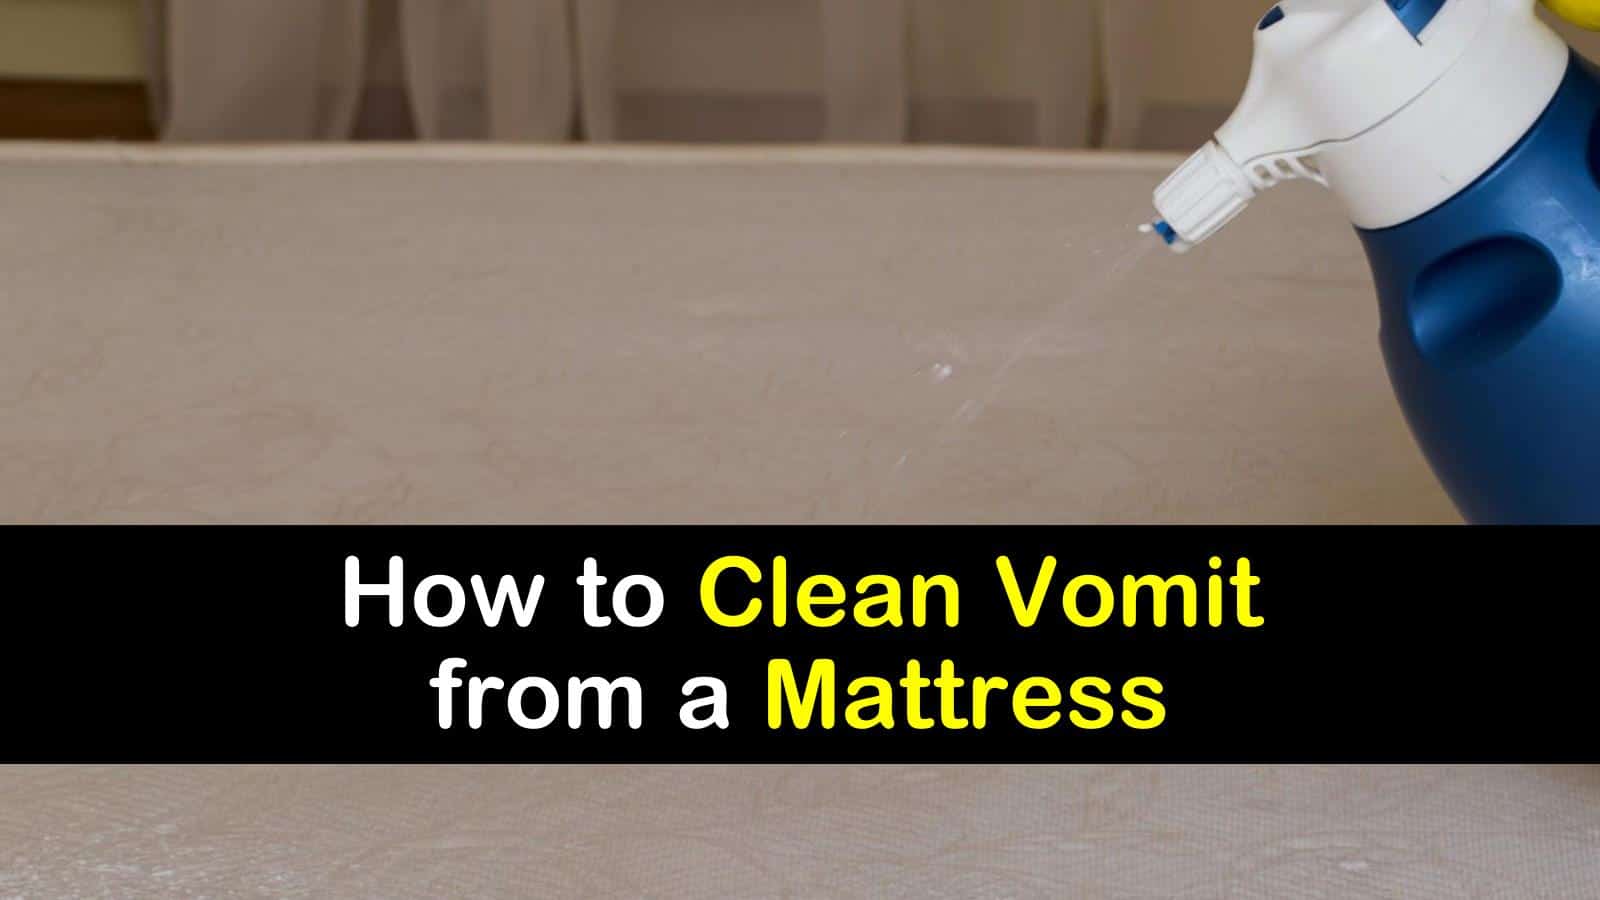 How to Clean Throw Up from Mattress 